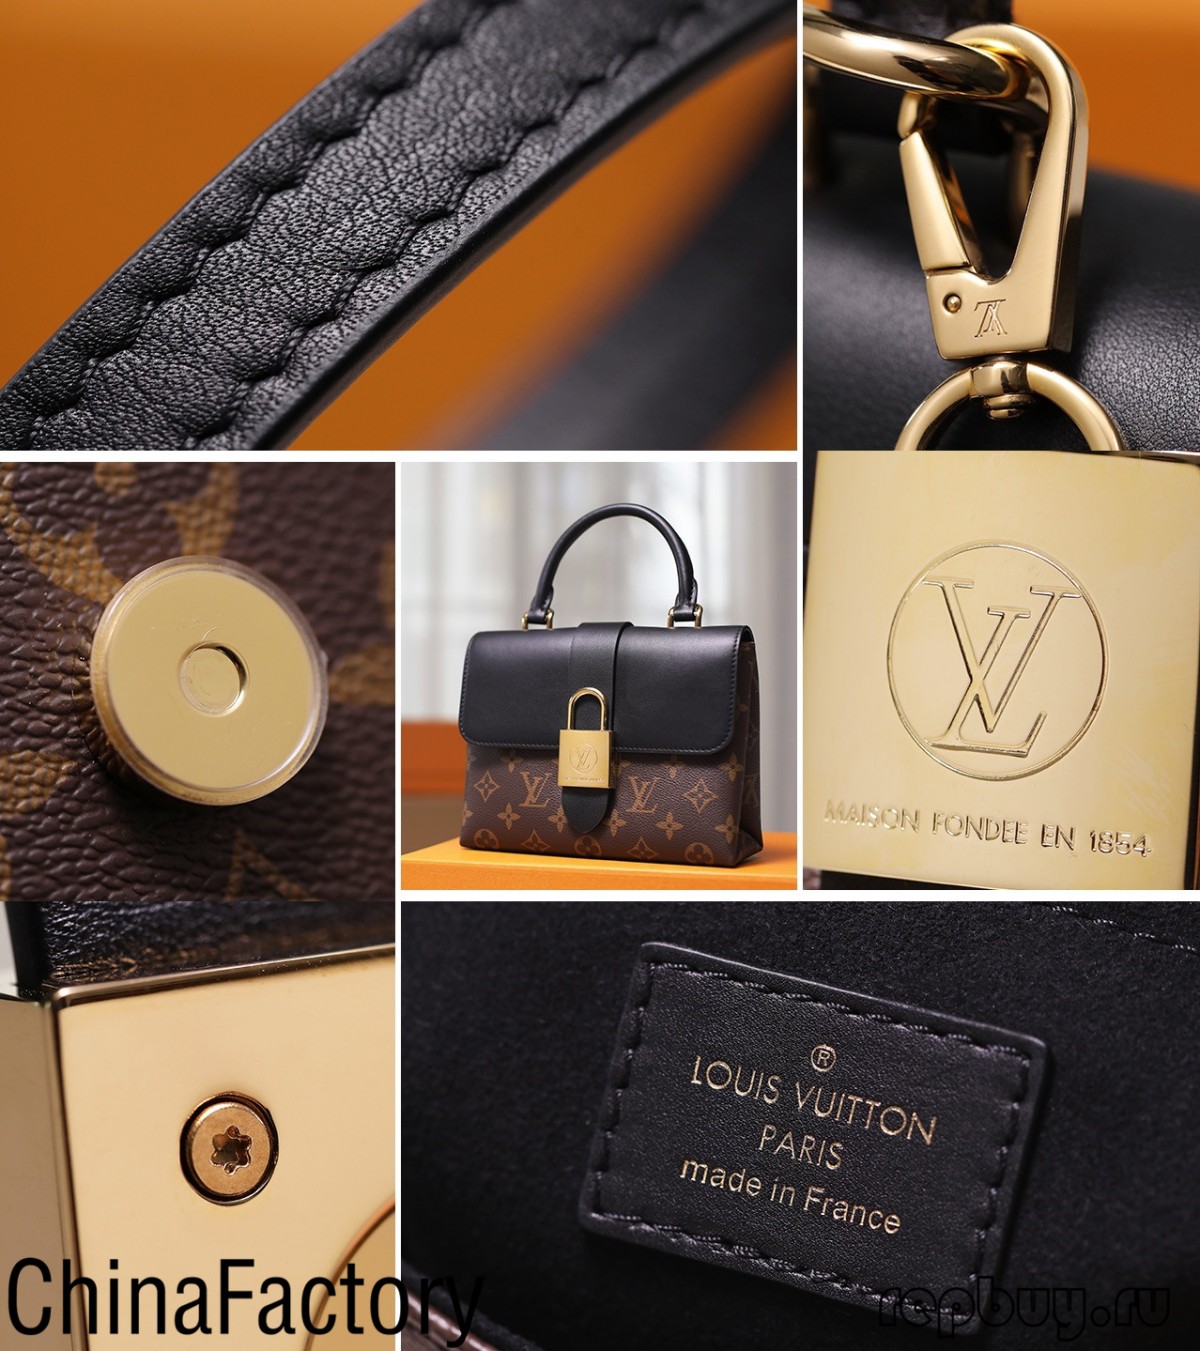 Where can I buy the best luxury replica bags?(2022 Edition)-Best Quality Fake Louis Vuitton Bag Online Store, Replica designer bag ru